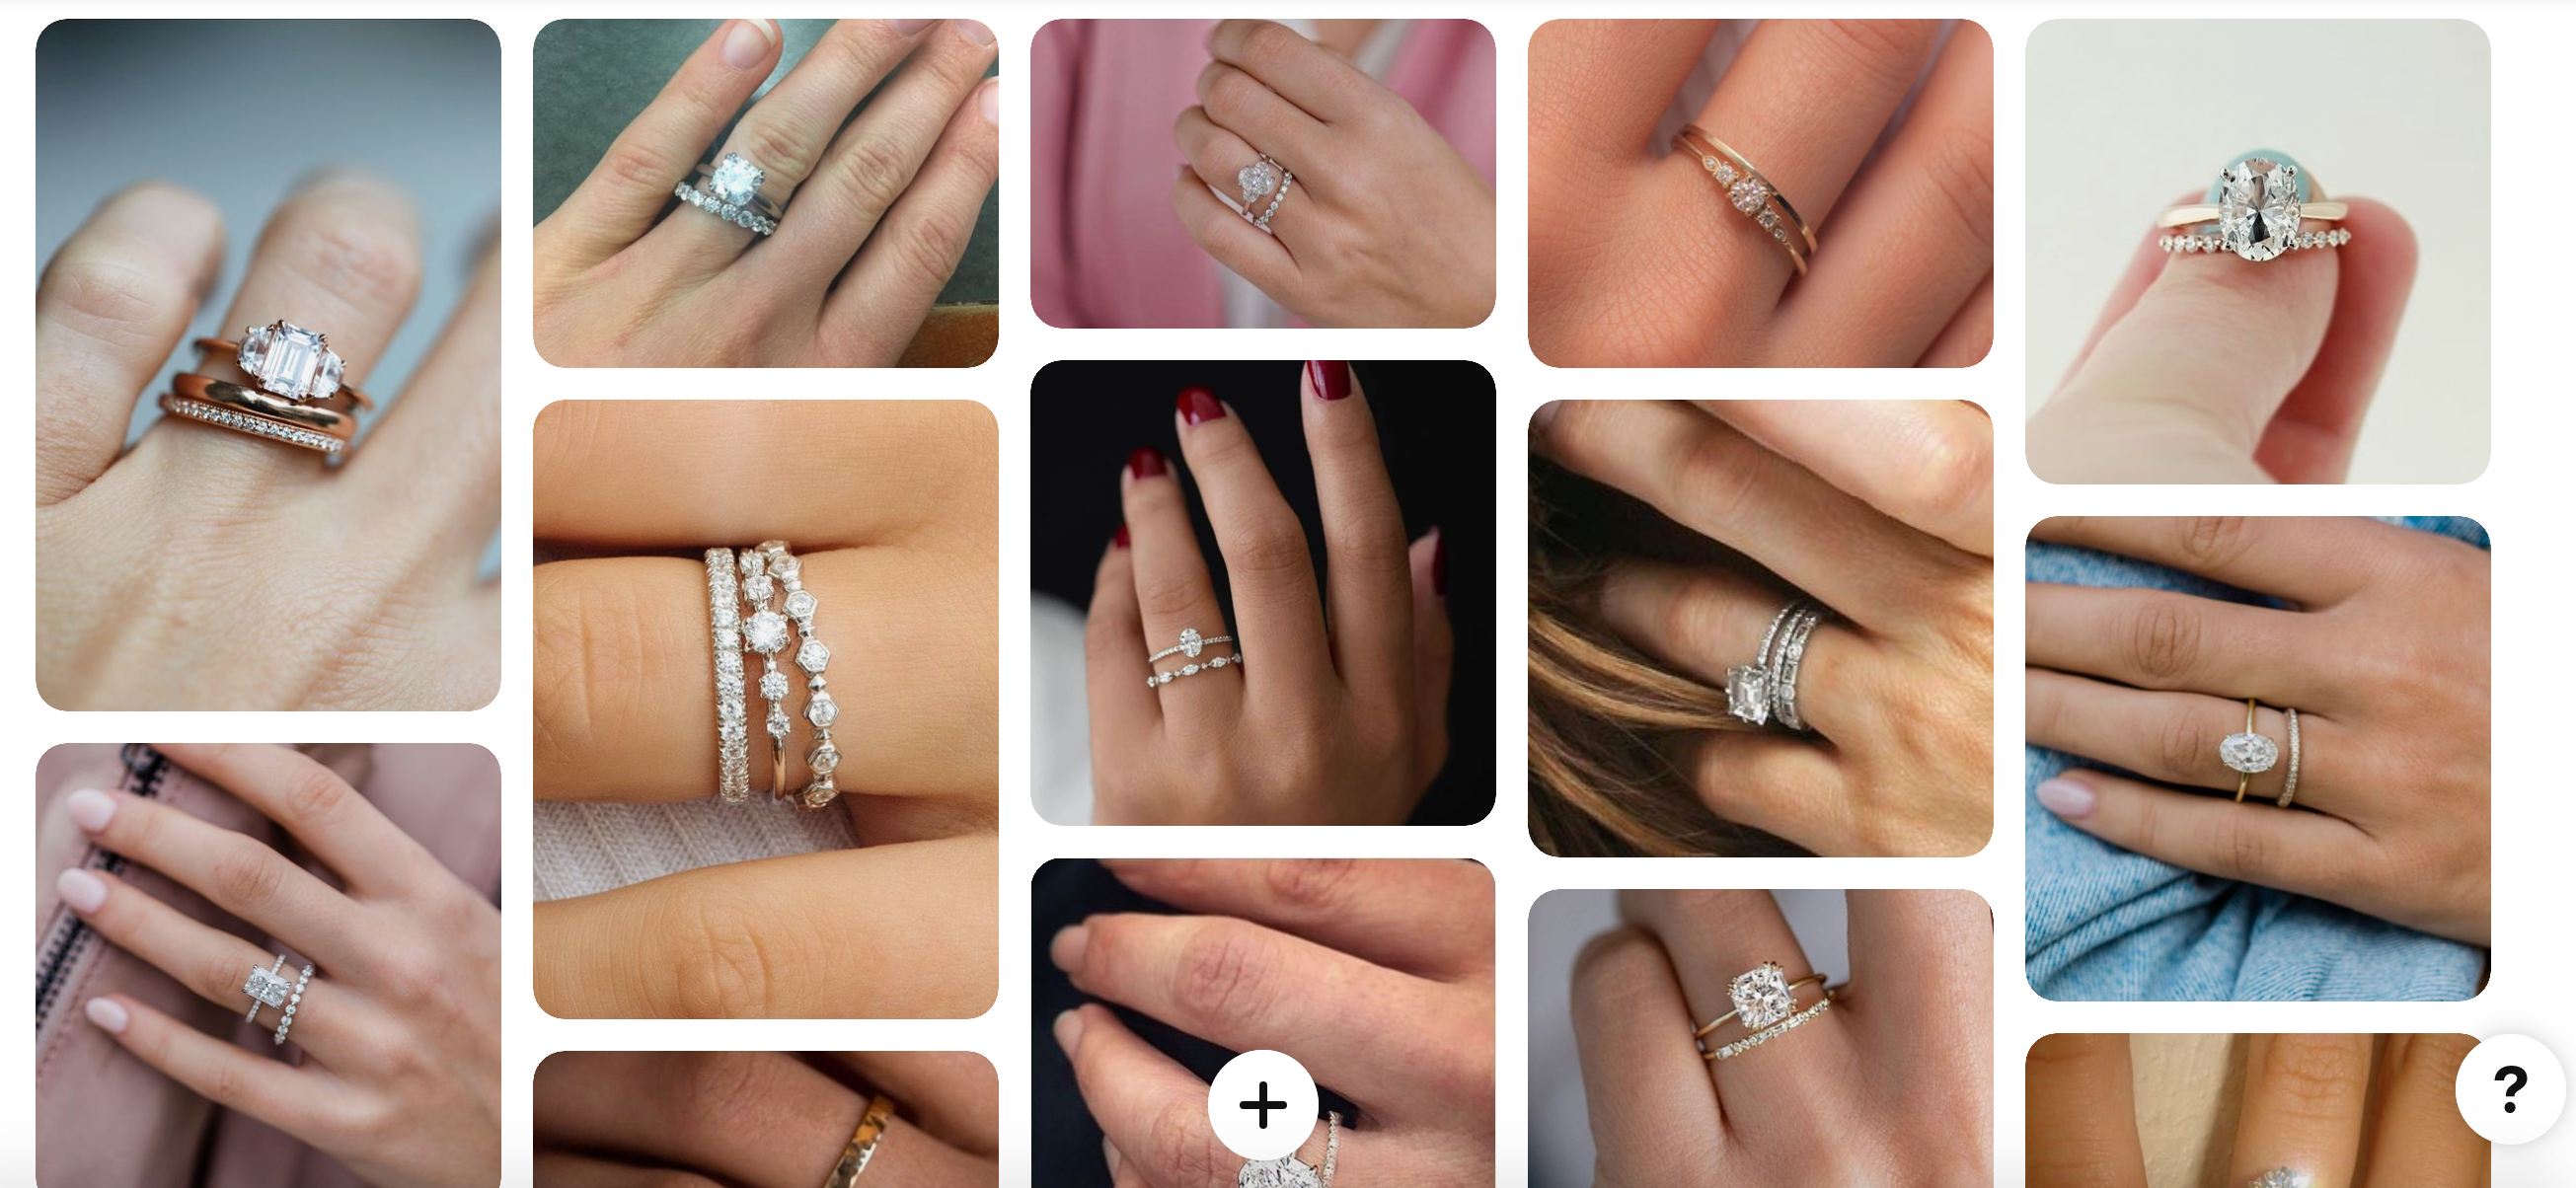 How to Choose a Wedding Band for Your Engagement Ring | Tiffany & Co.